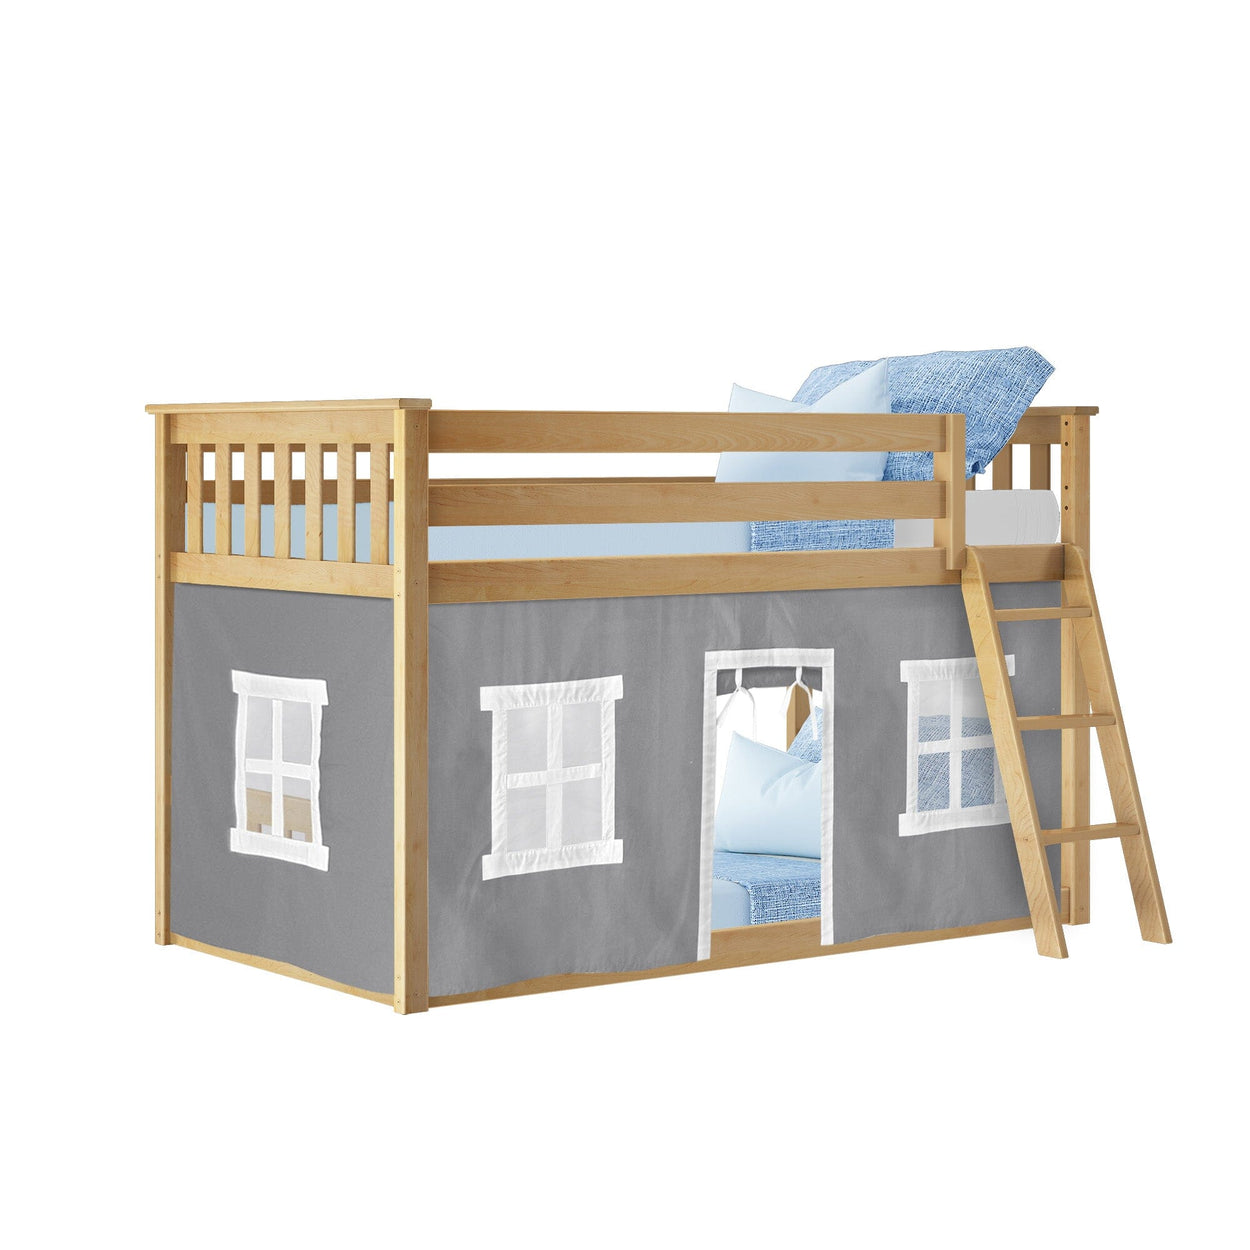 180214001054 : Bunk Beds Twin-Size Low Bunk Bed With Curtain, Natural + Grey Curtain